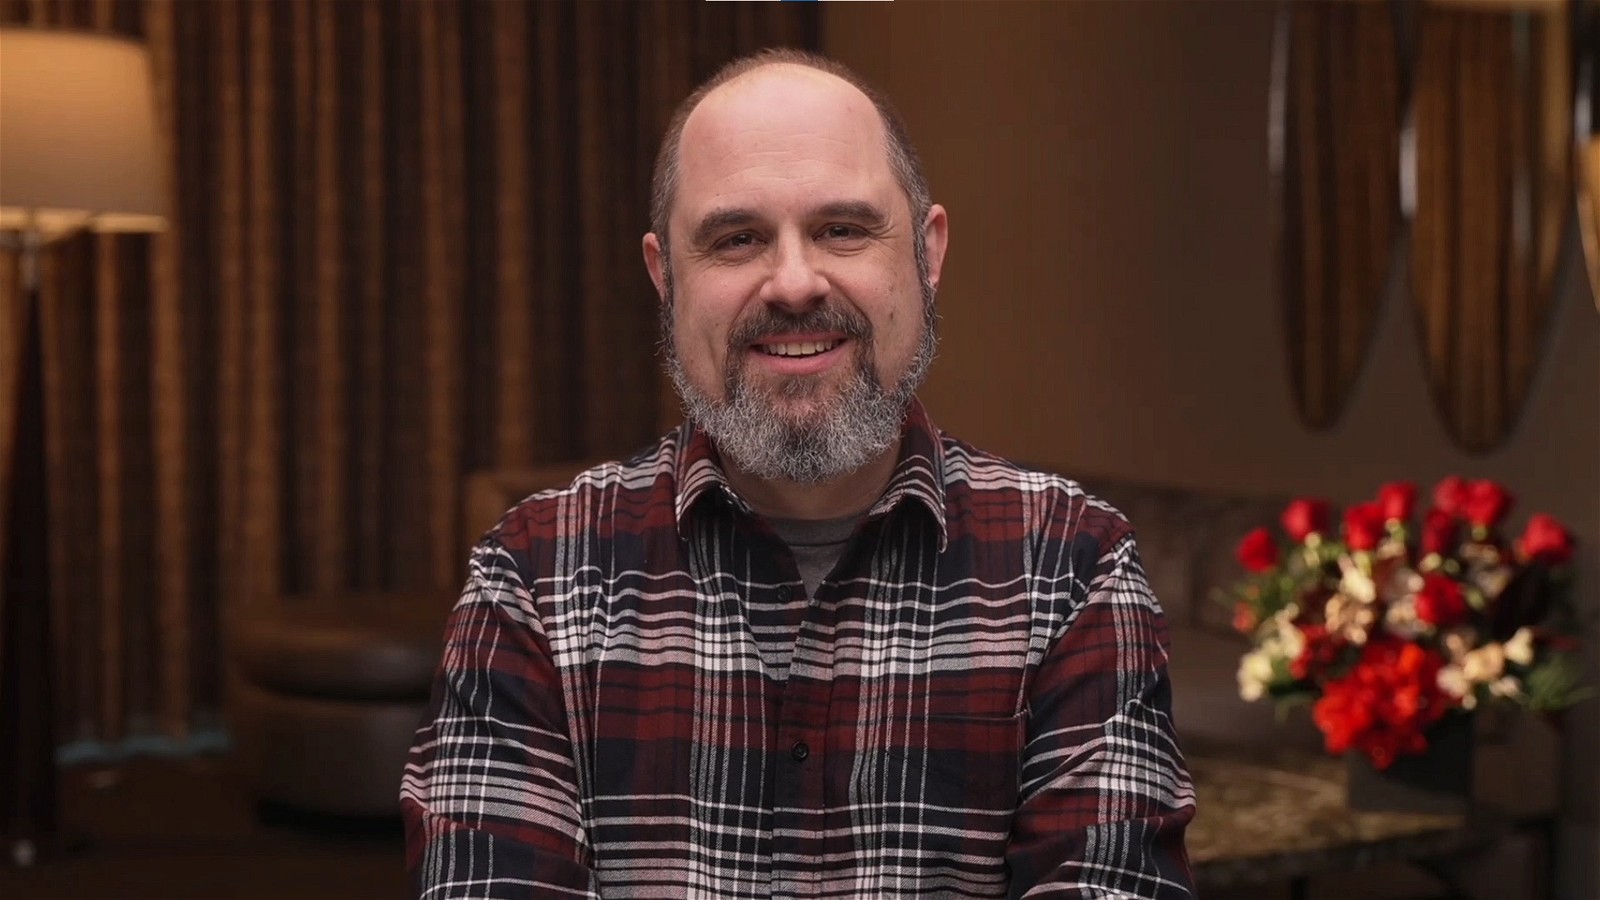 Craig Mazin is the co-creator of The Last of Us.